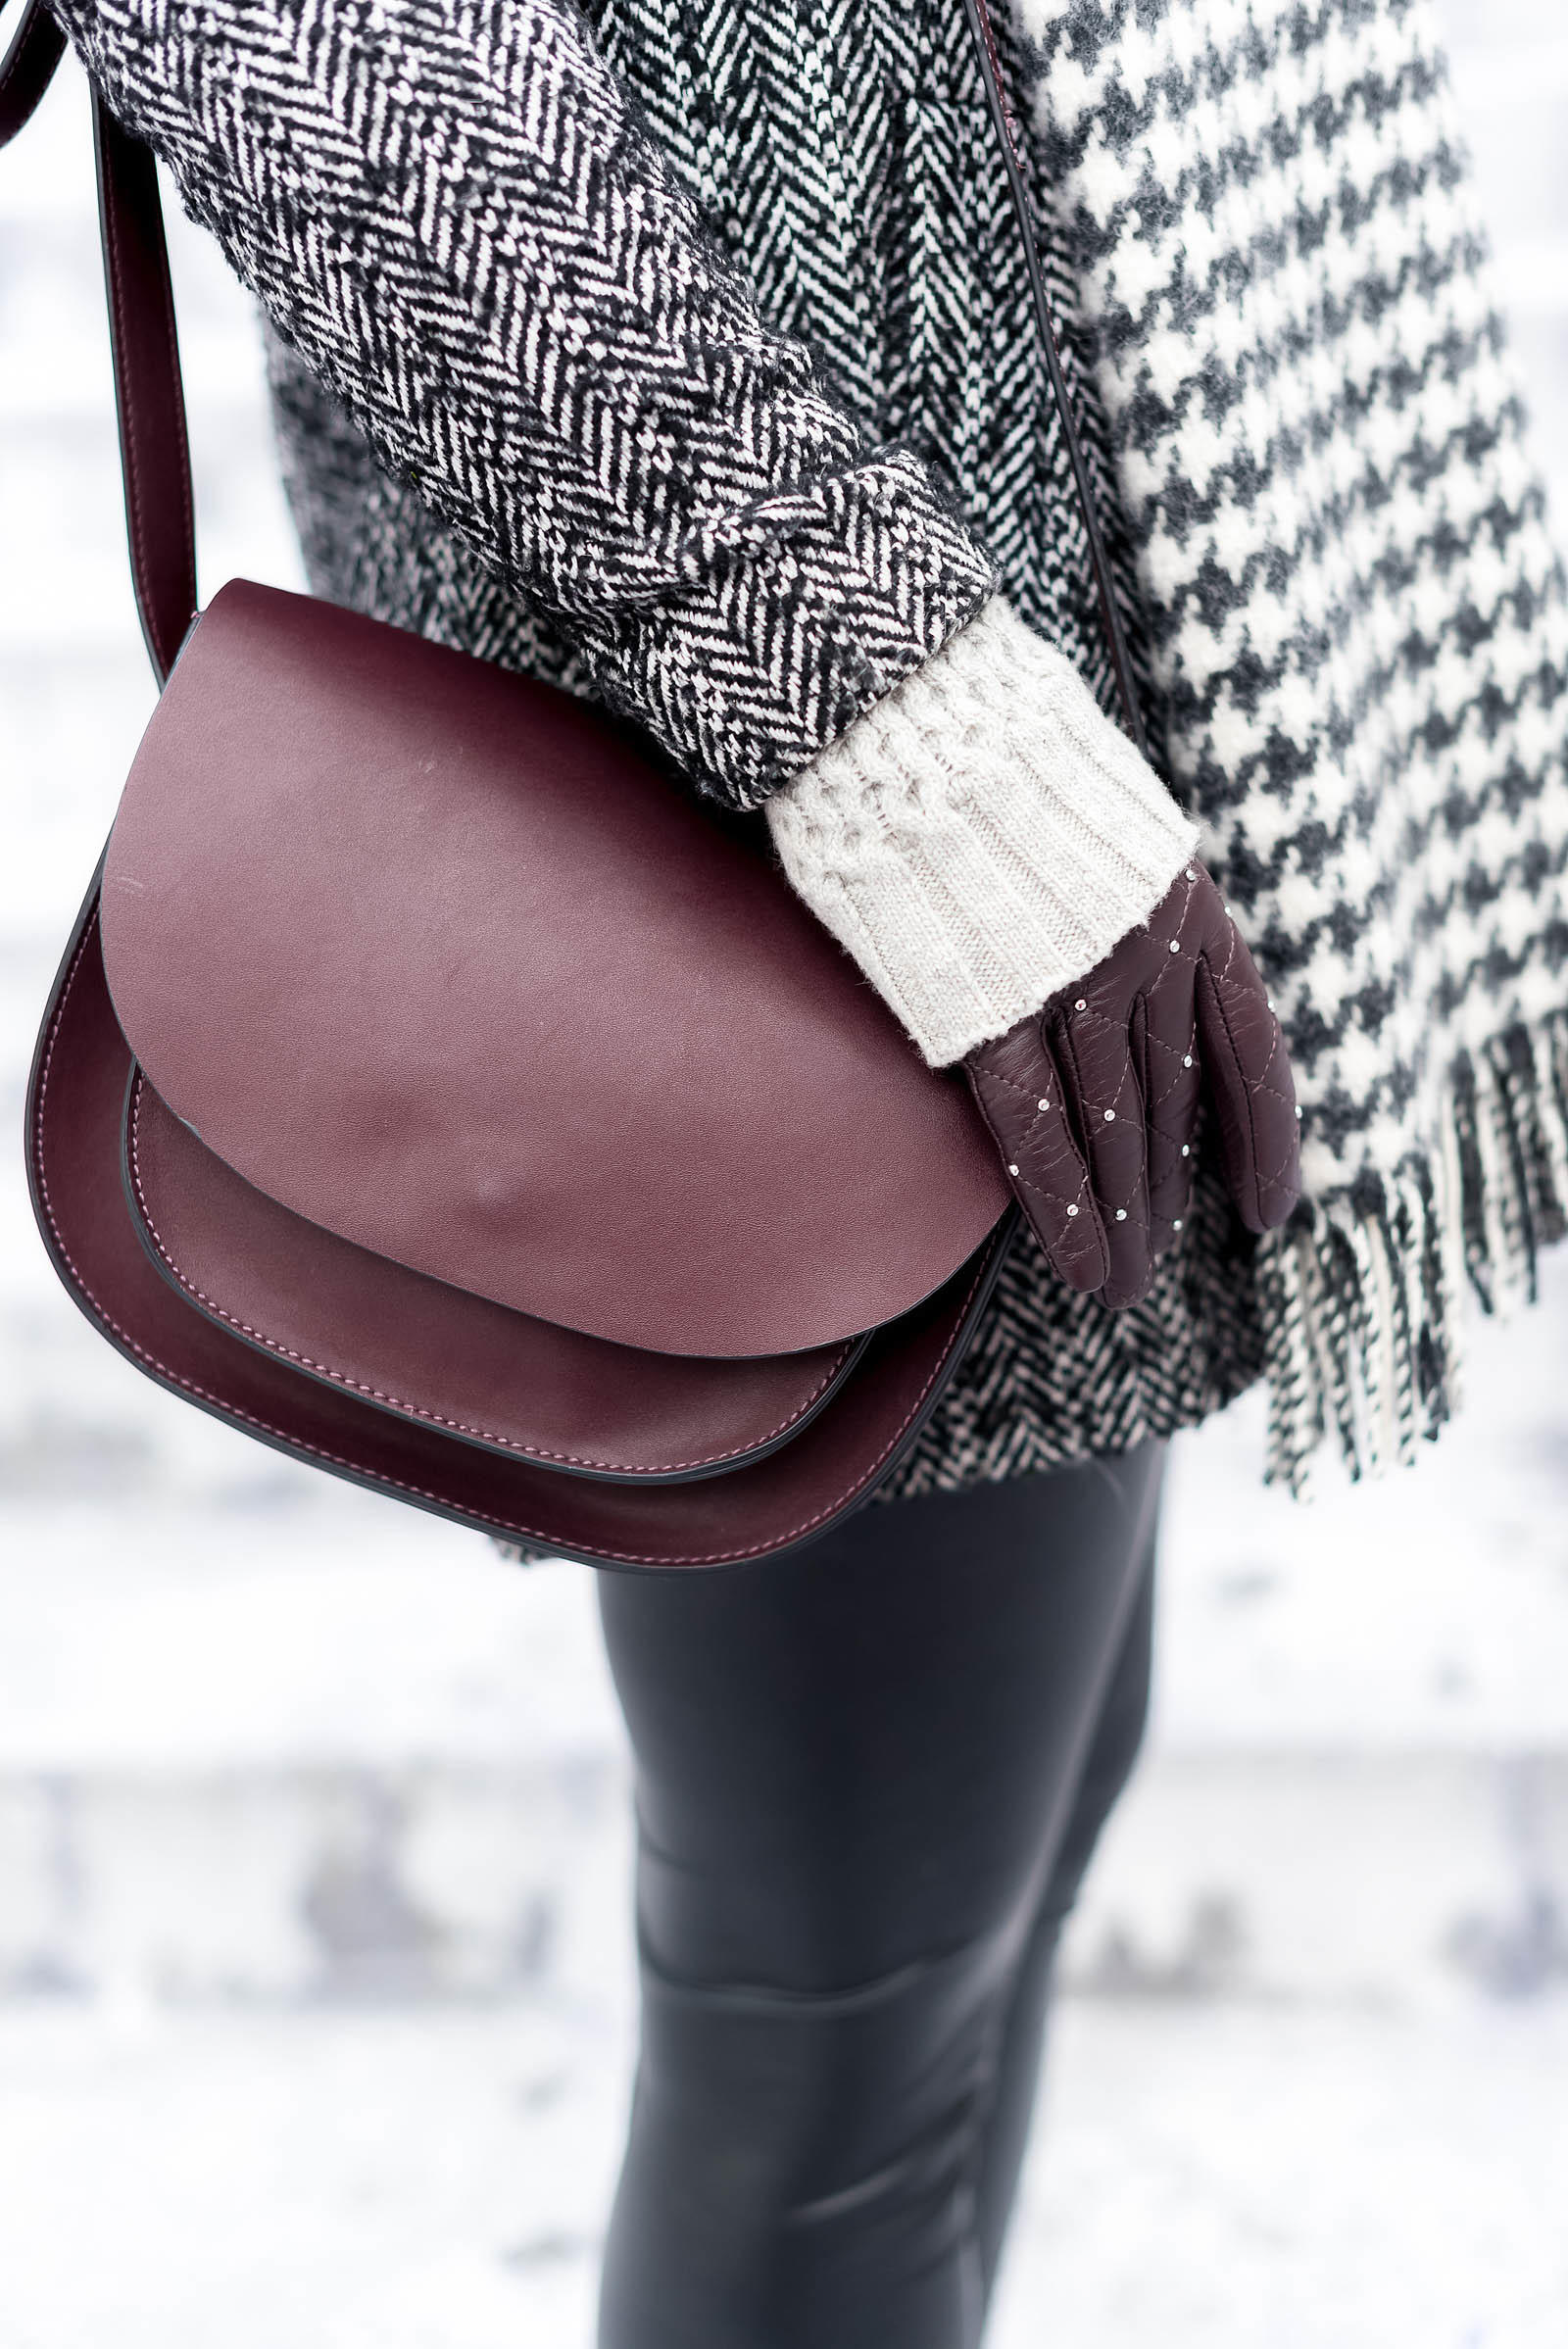 Herringbone Houndstooth Burgundy Leather Winter Outfit